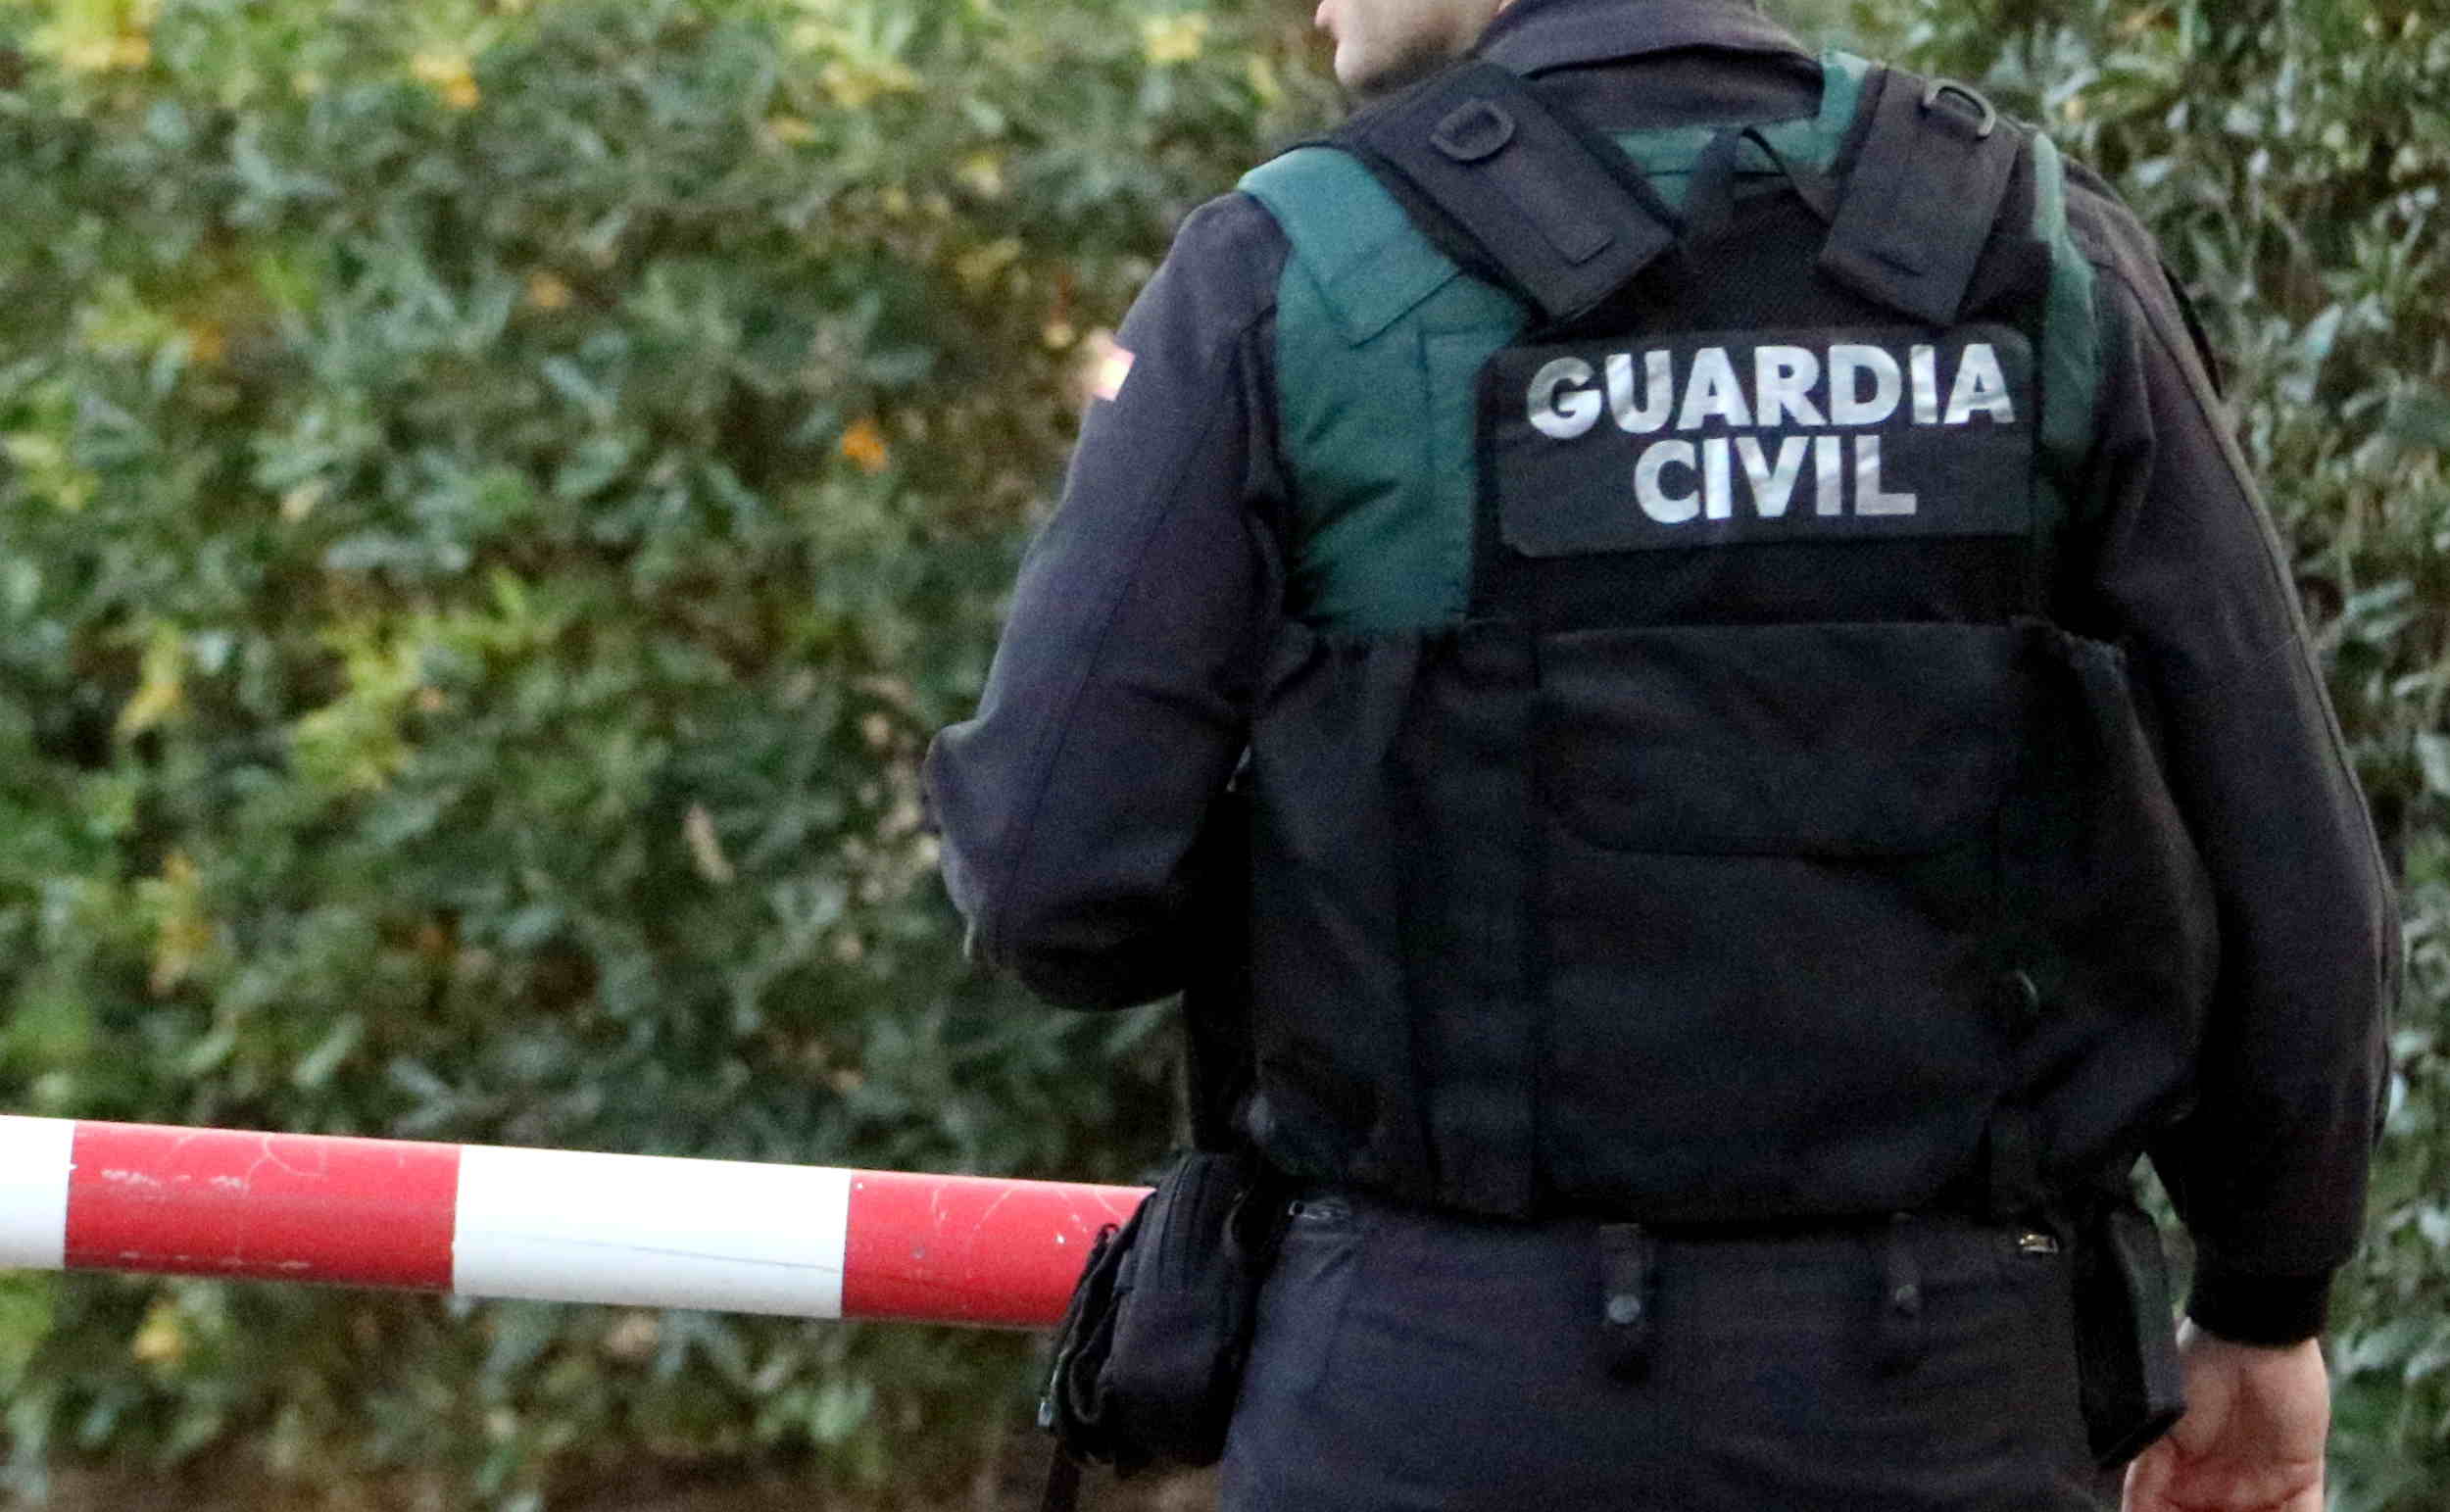 Spanish Guardia Civil police officer (by ACN)